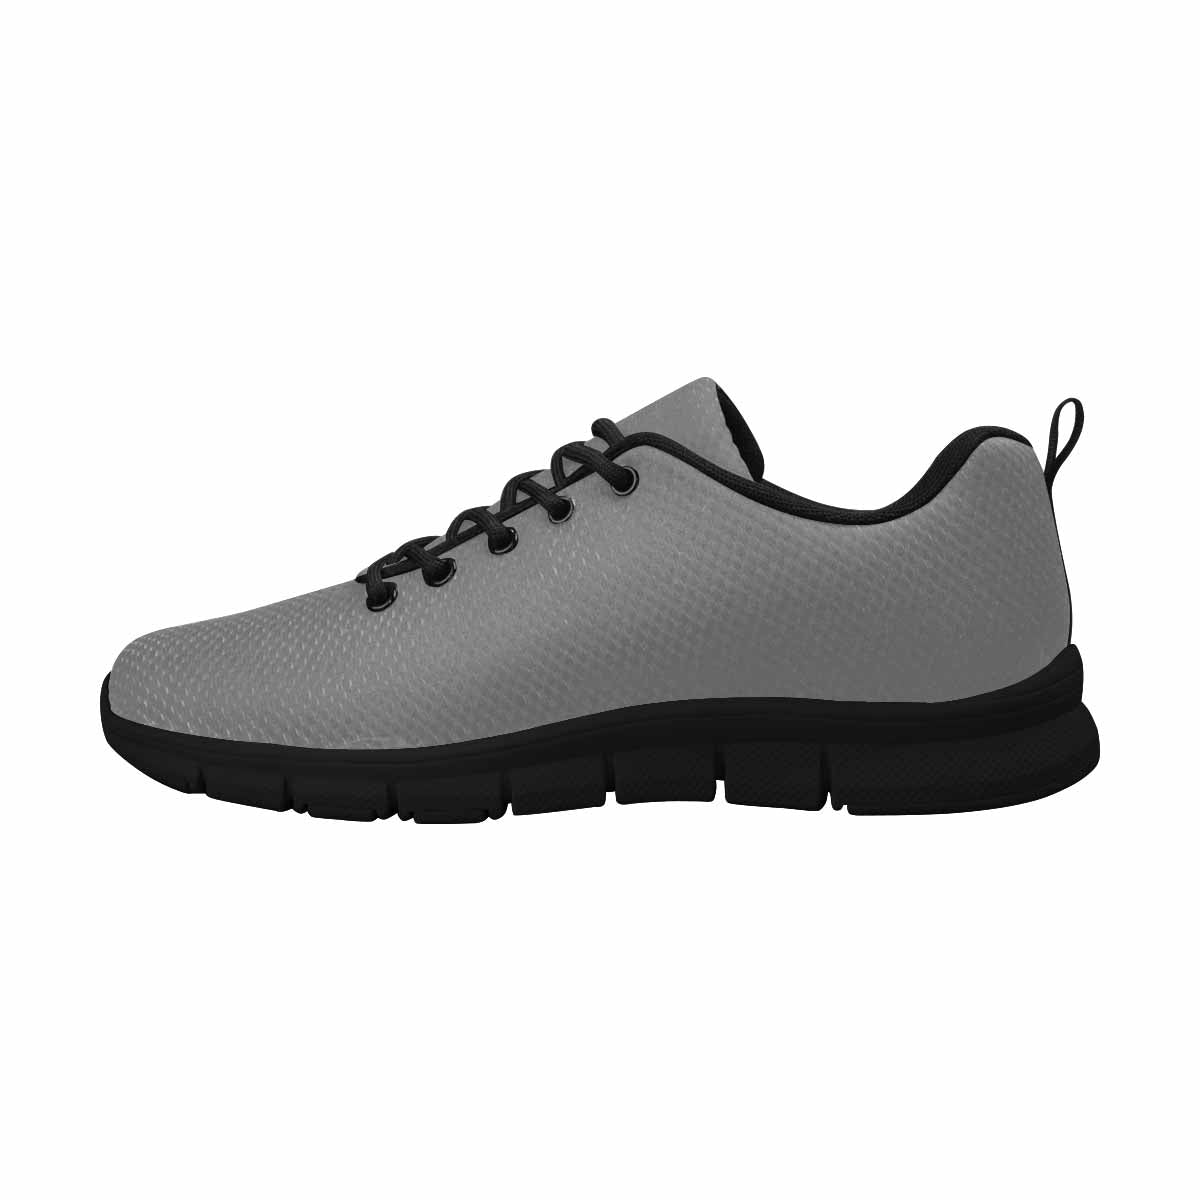 Sneakers For Men, Grey Running Shoes